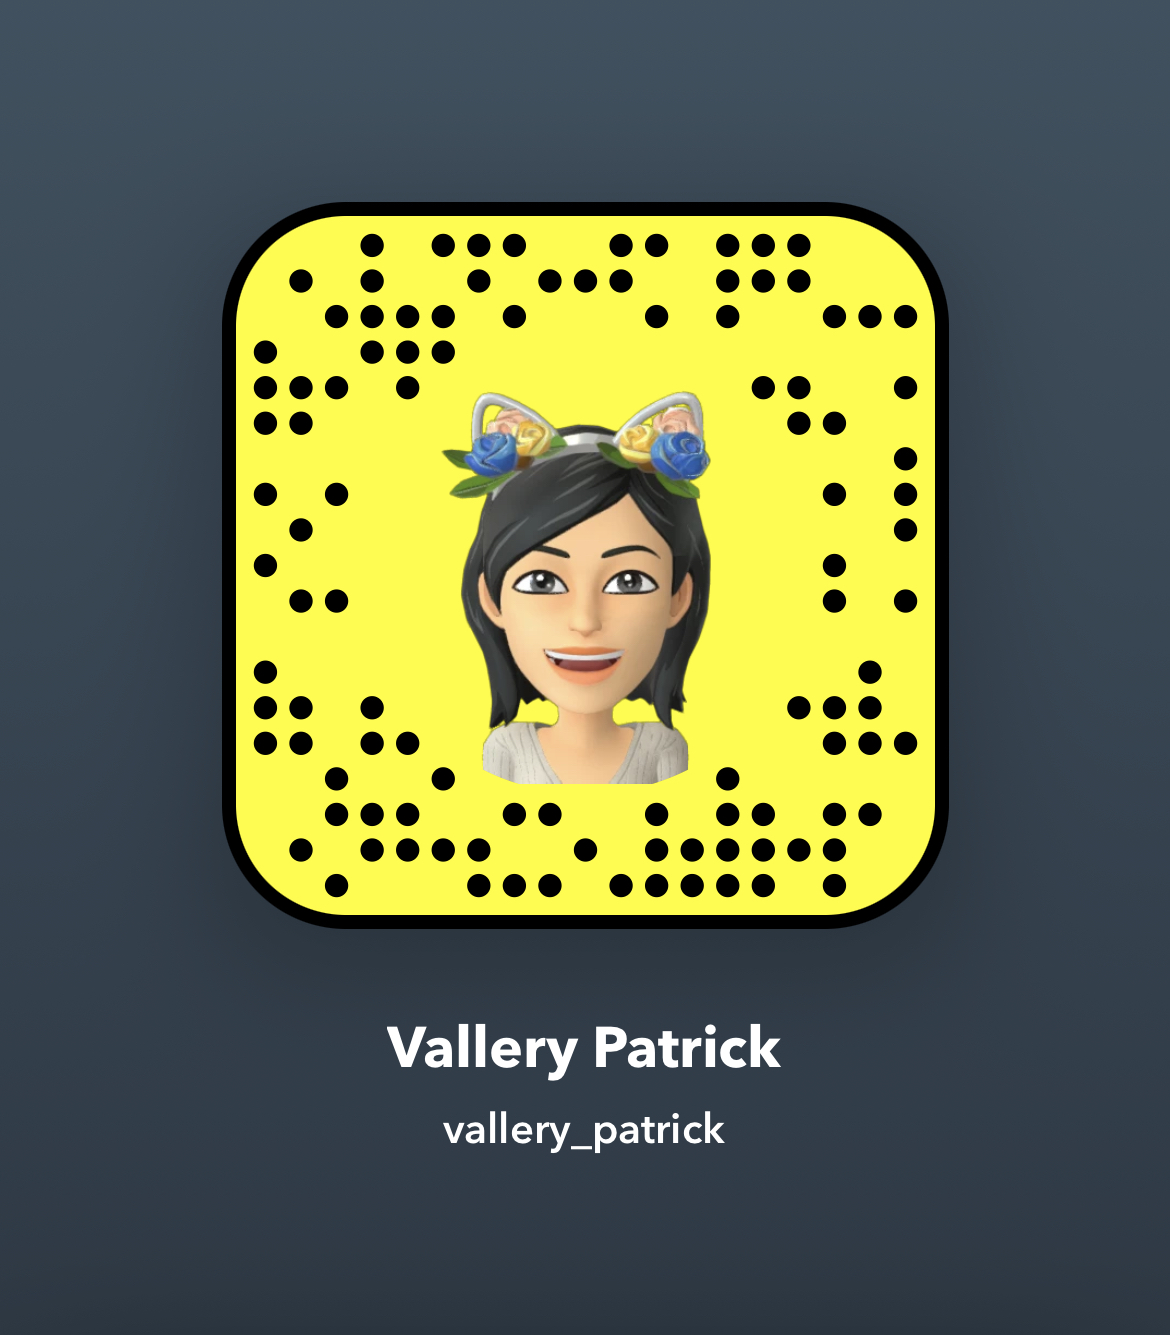 I’m down for hookup and massage I charges at cool rate snap me @vallery_Patrick if you’re interested